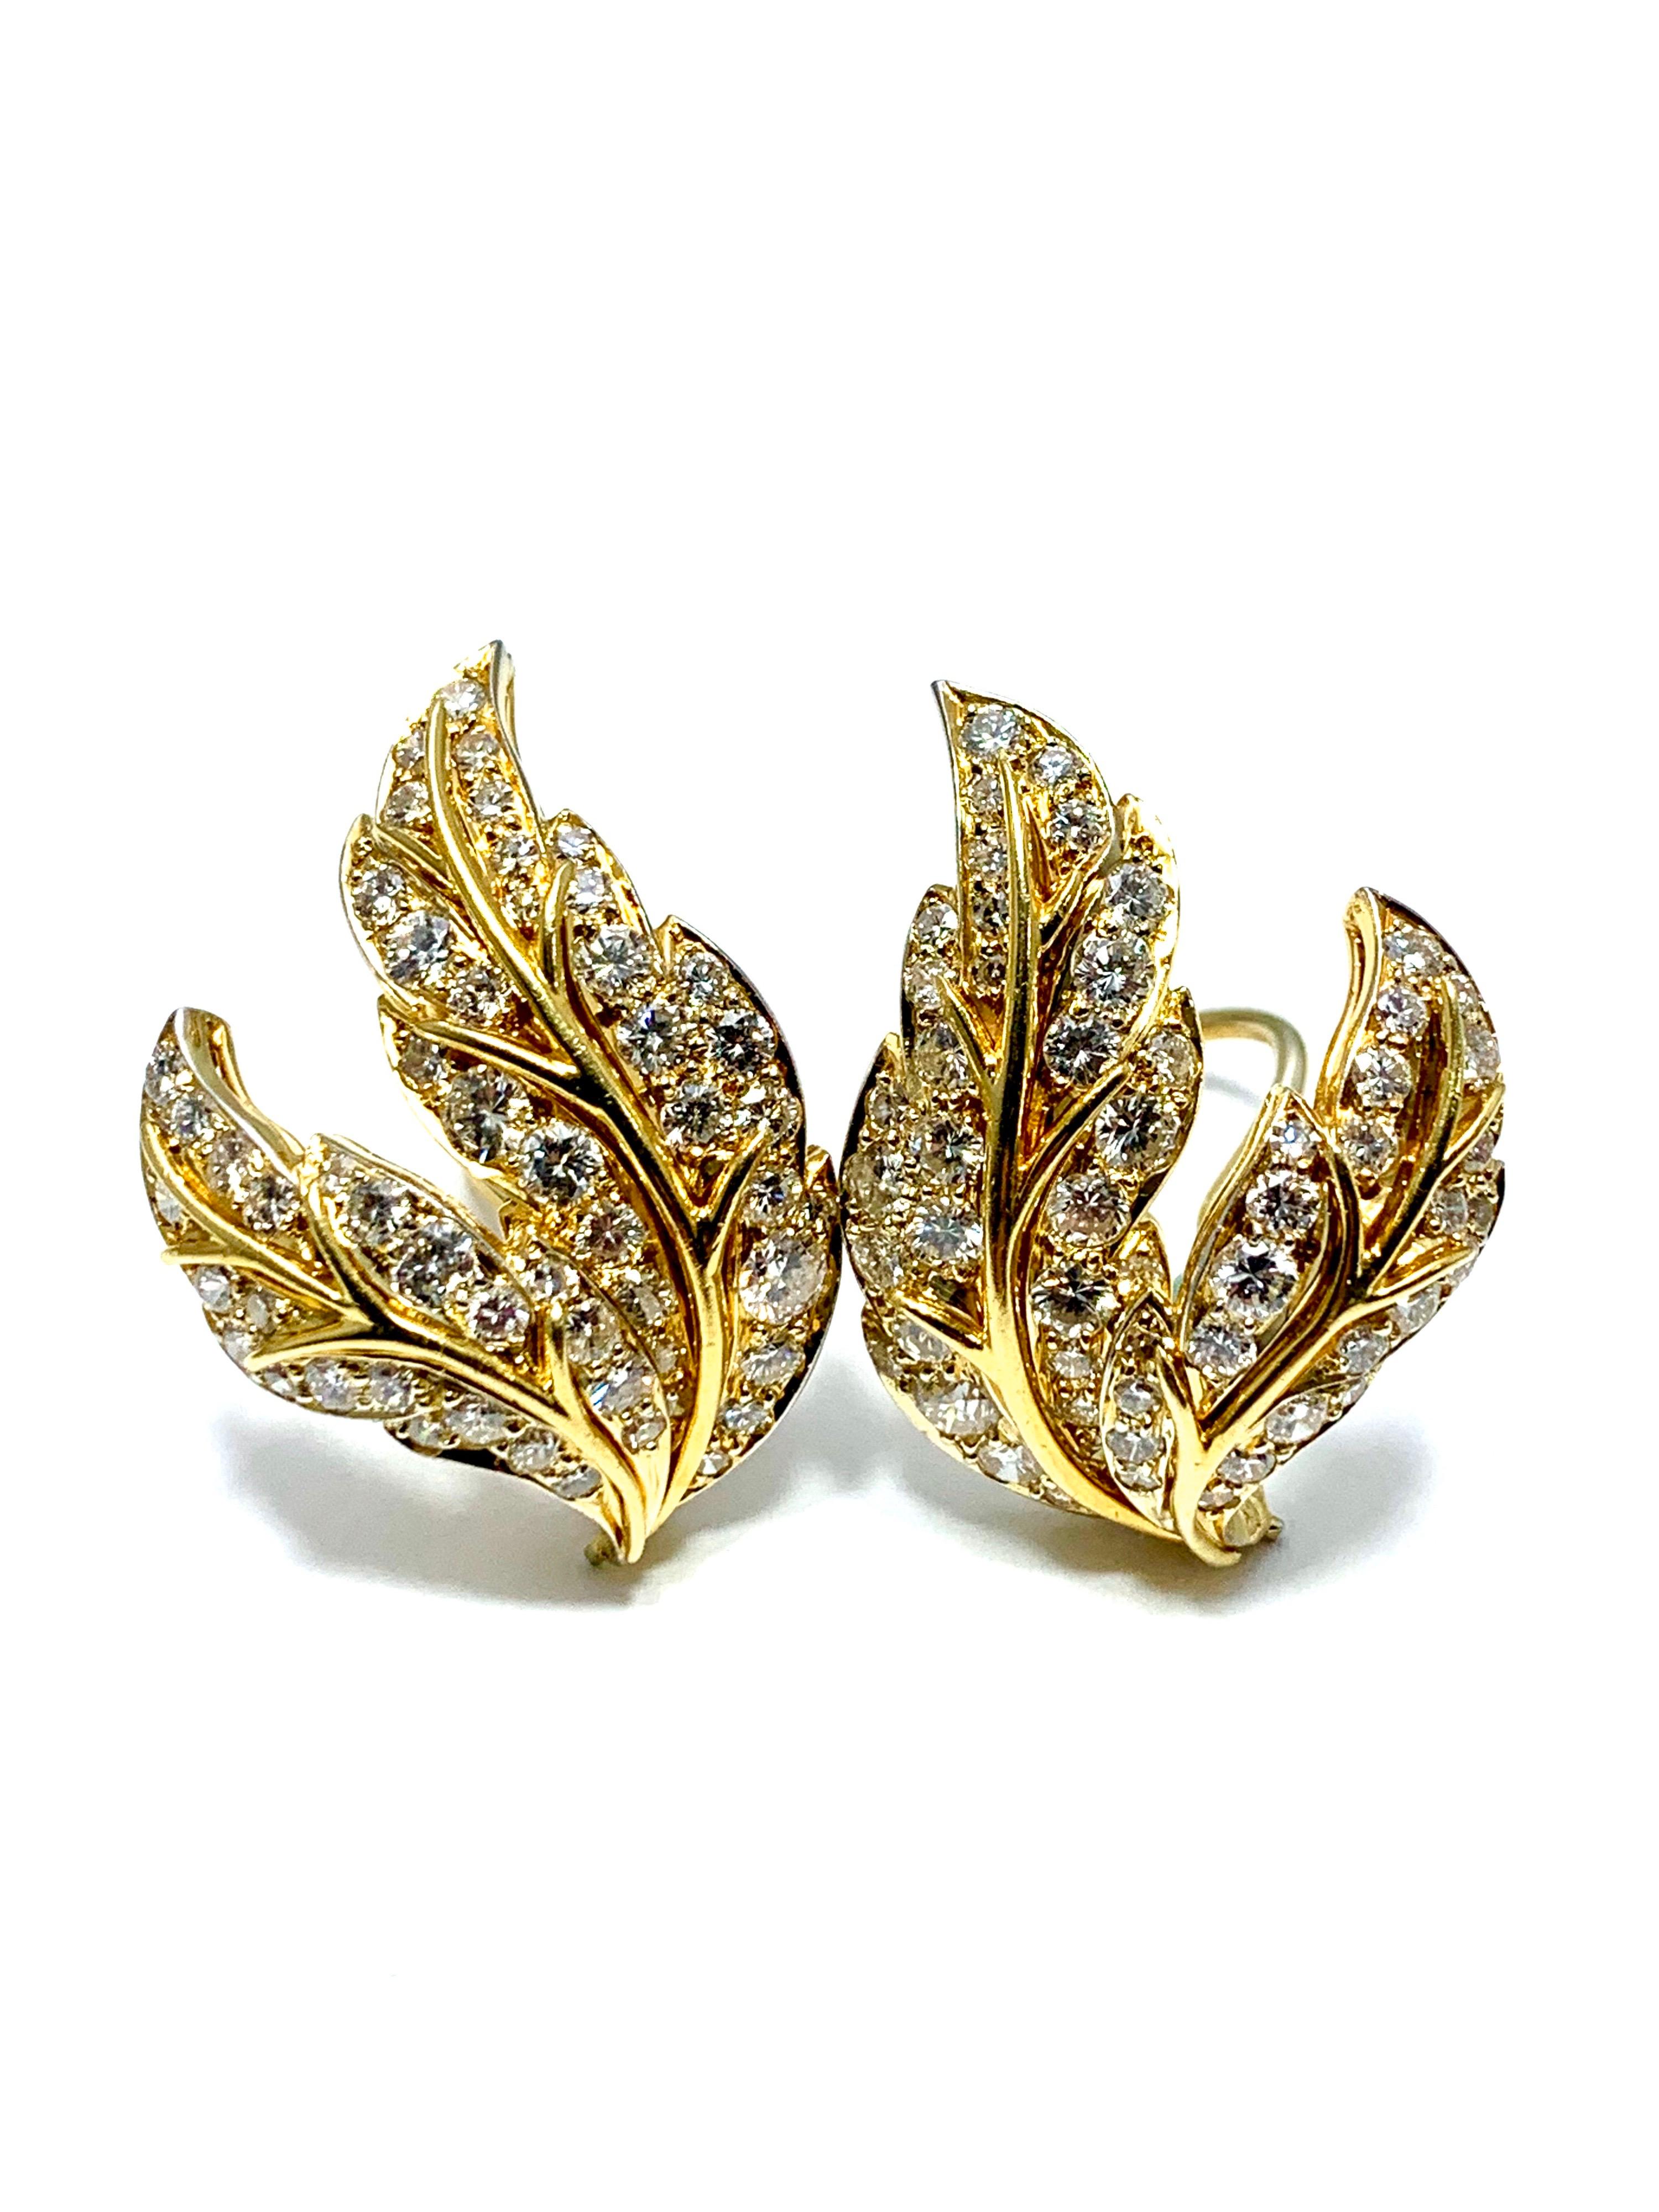 A show stopping pair of Van Cleef & Arpels Diamond and 18k yellow gold leaf earrings.  The 110 round cut Diamonds combine for a total weight of 4.28 carats.  They are graded as E-F color, VVS2-VS1 clarity.  The leaf design is intricately detailed